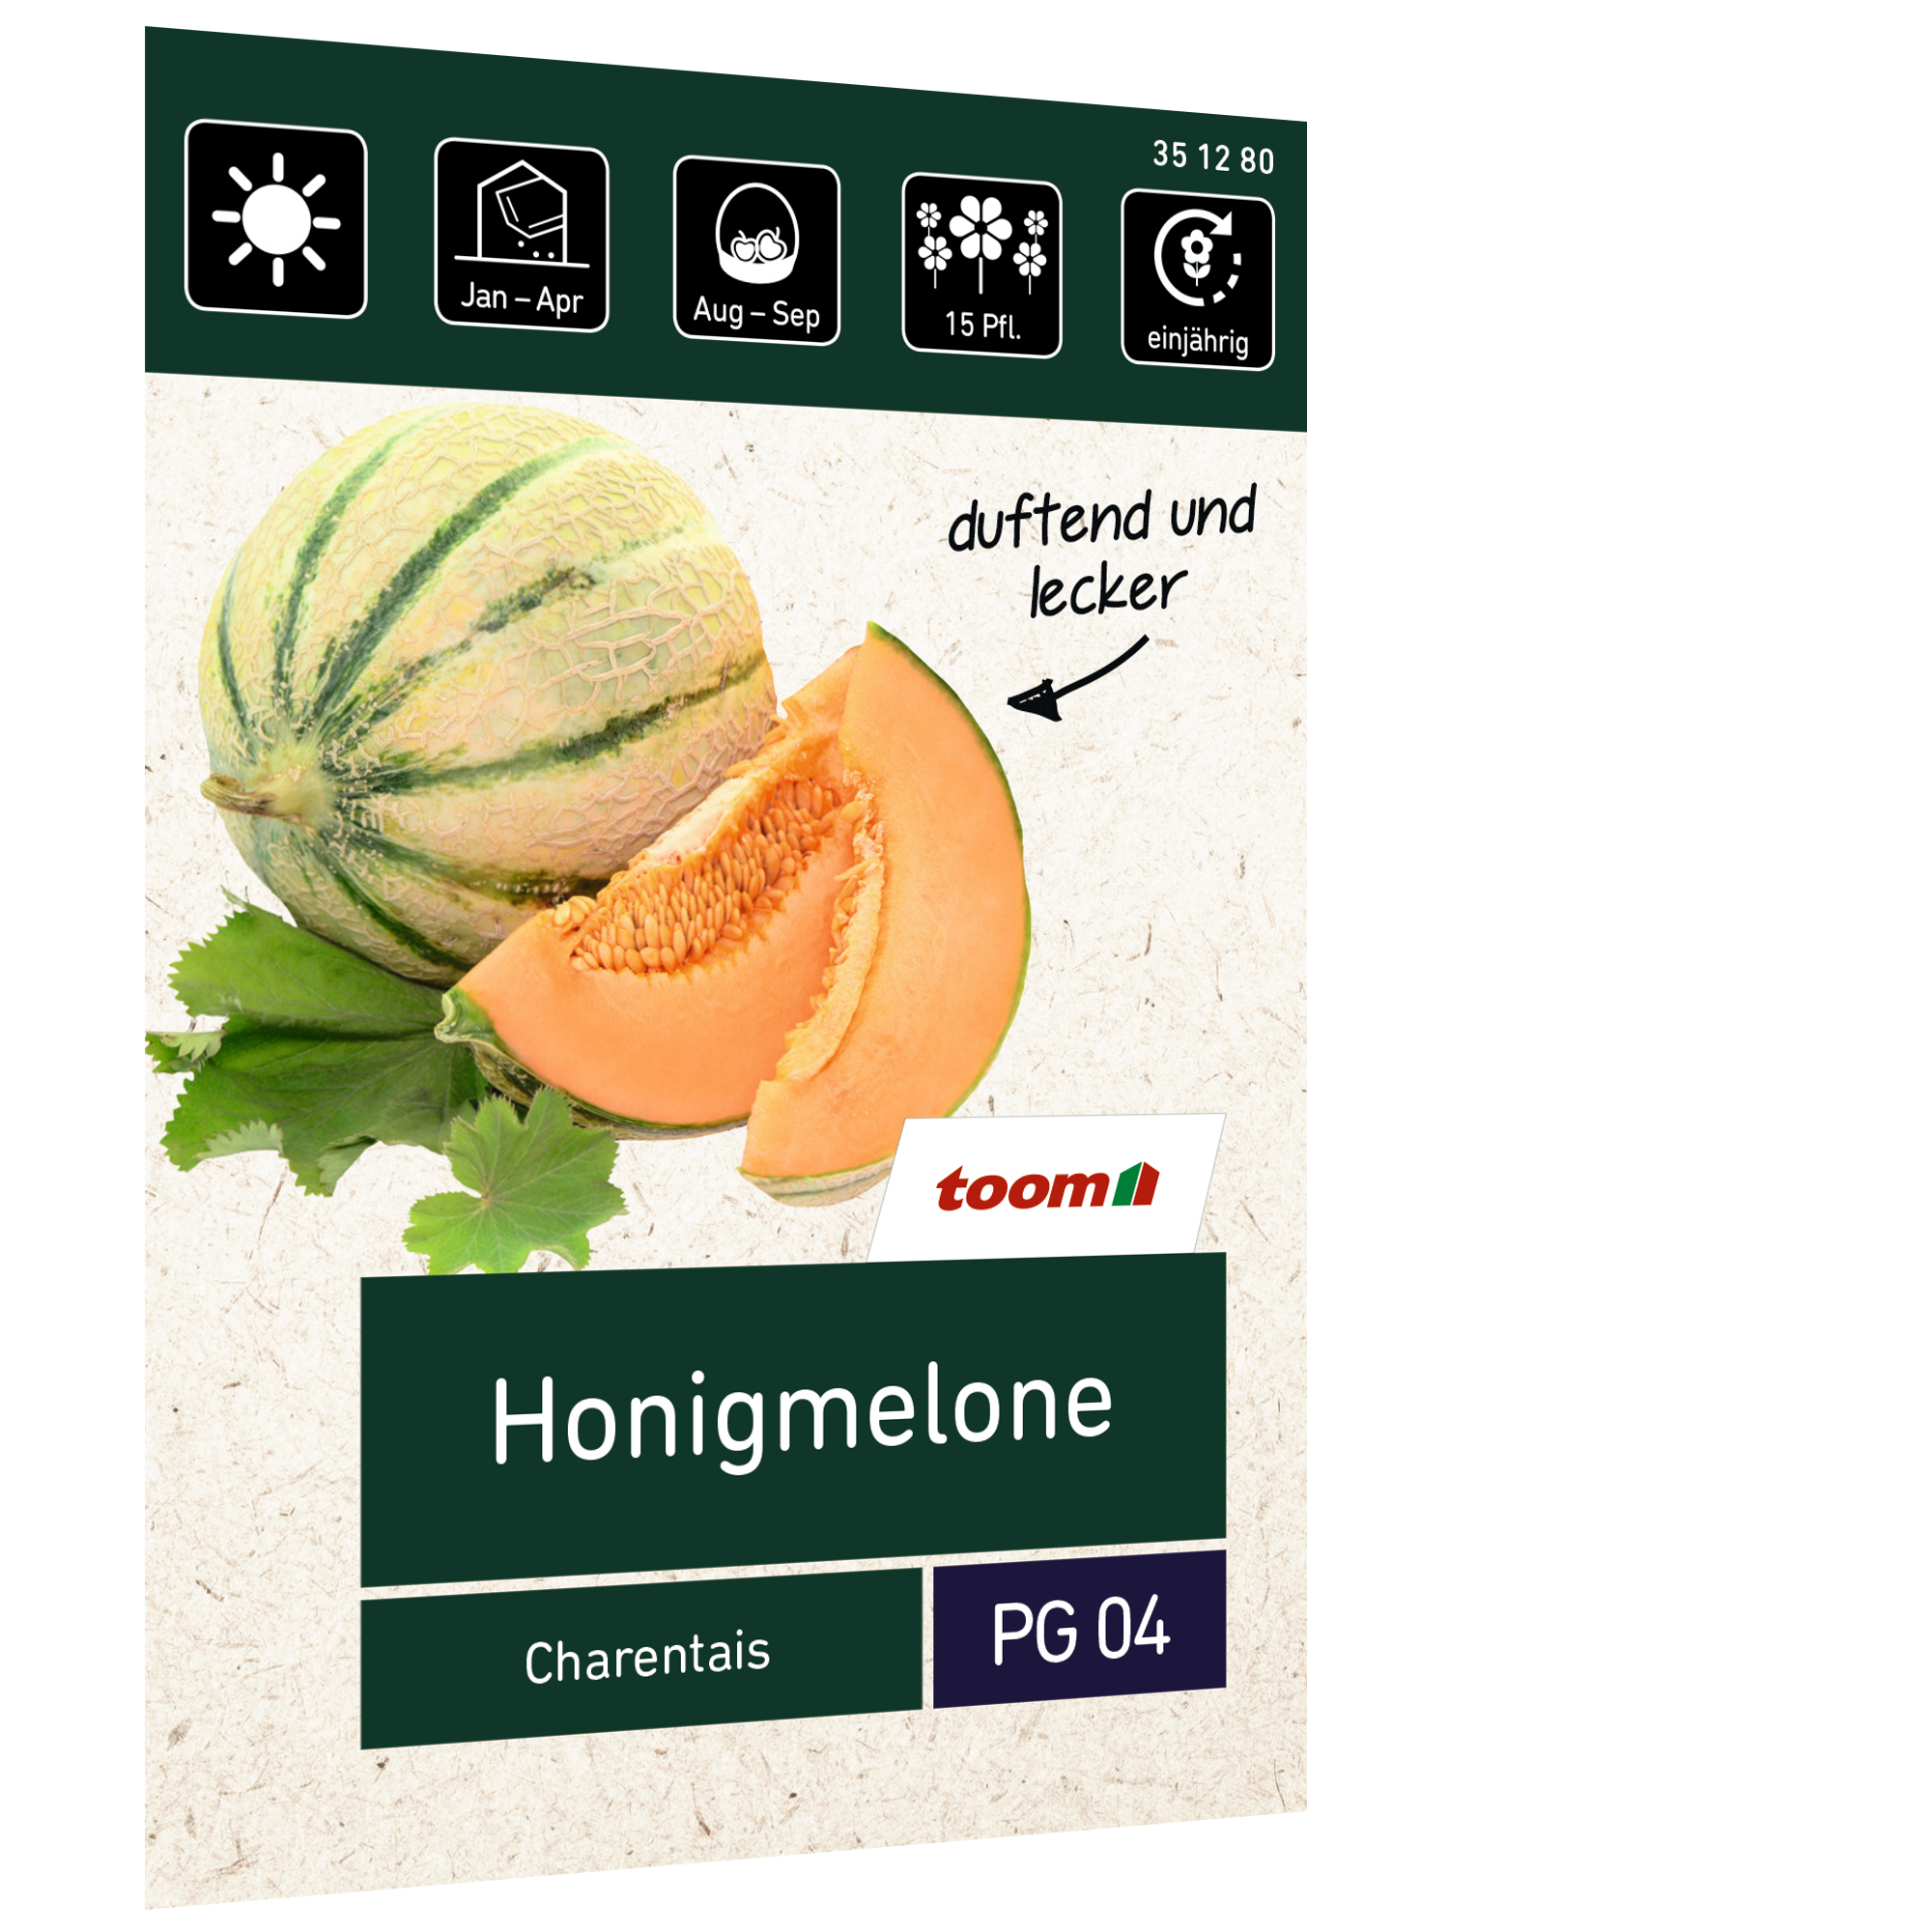 Honigmelone 'Charentais' + product picture